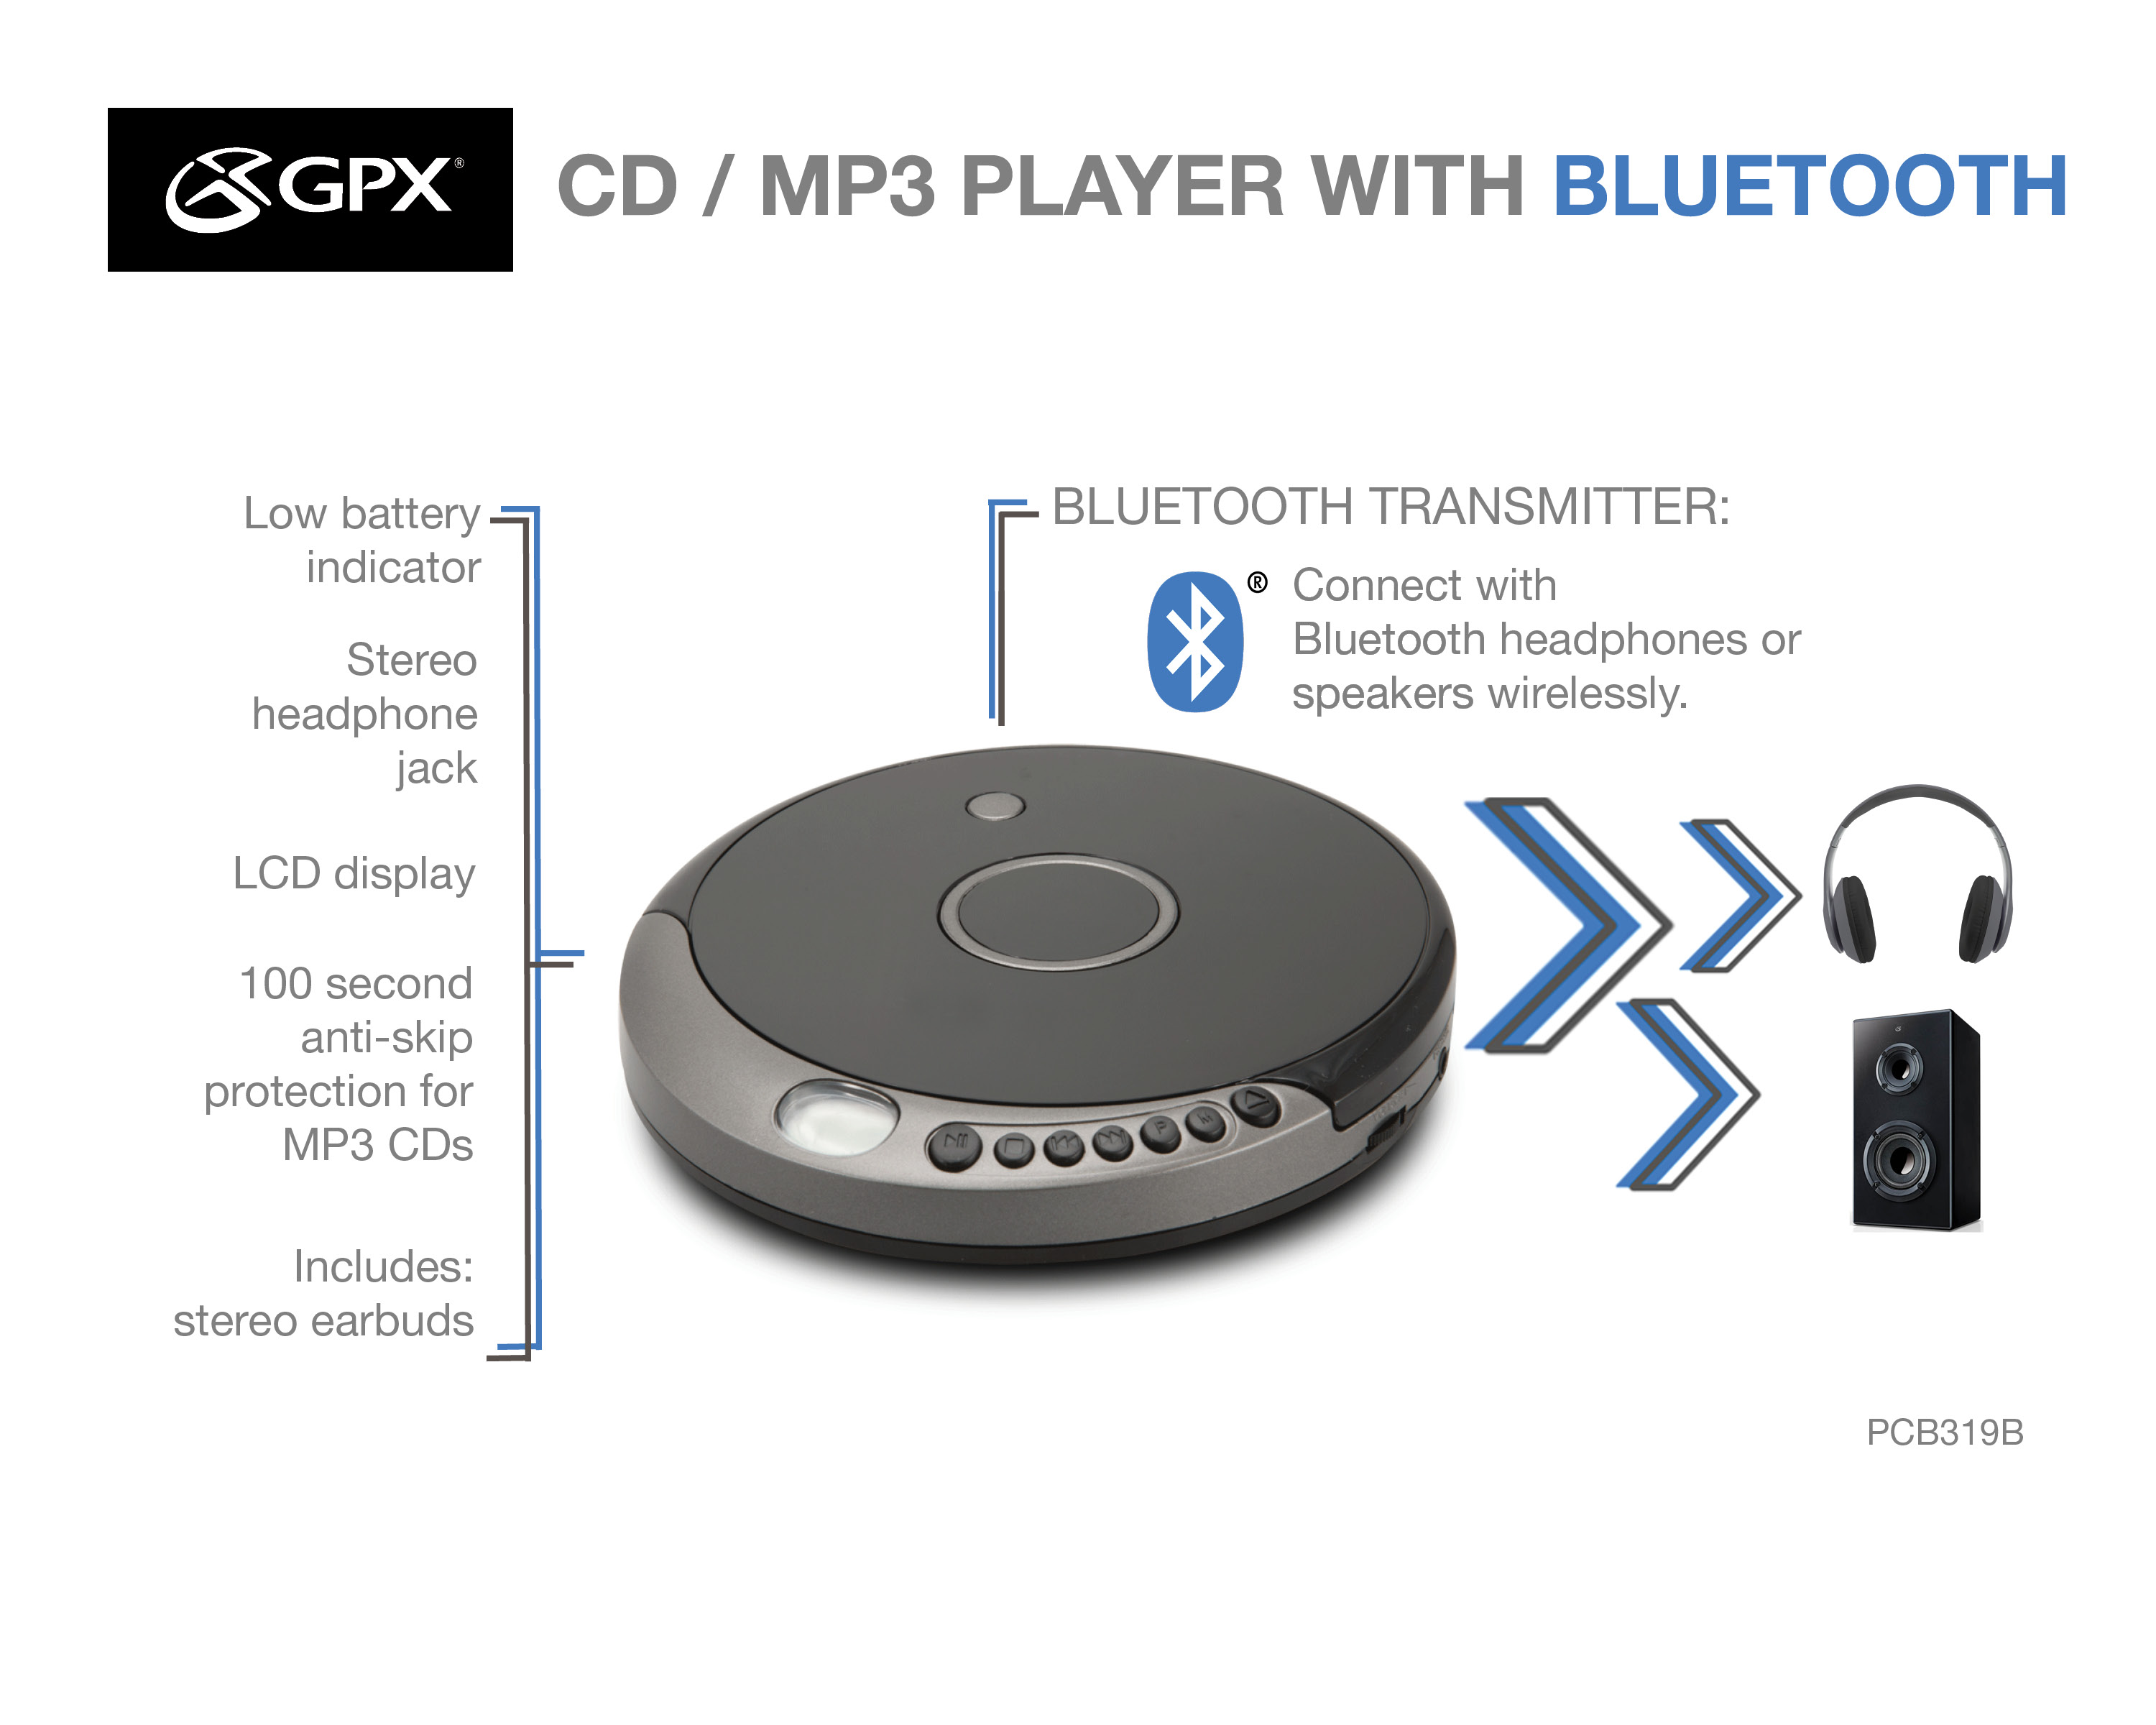 GPX CD/MP3 Player with Bluetooth (PCB319B) - image 3 of 10